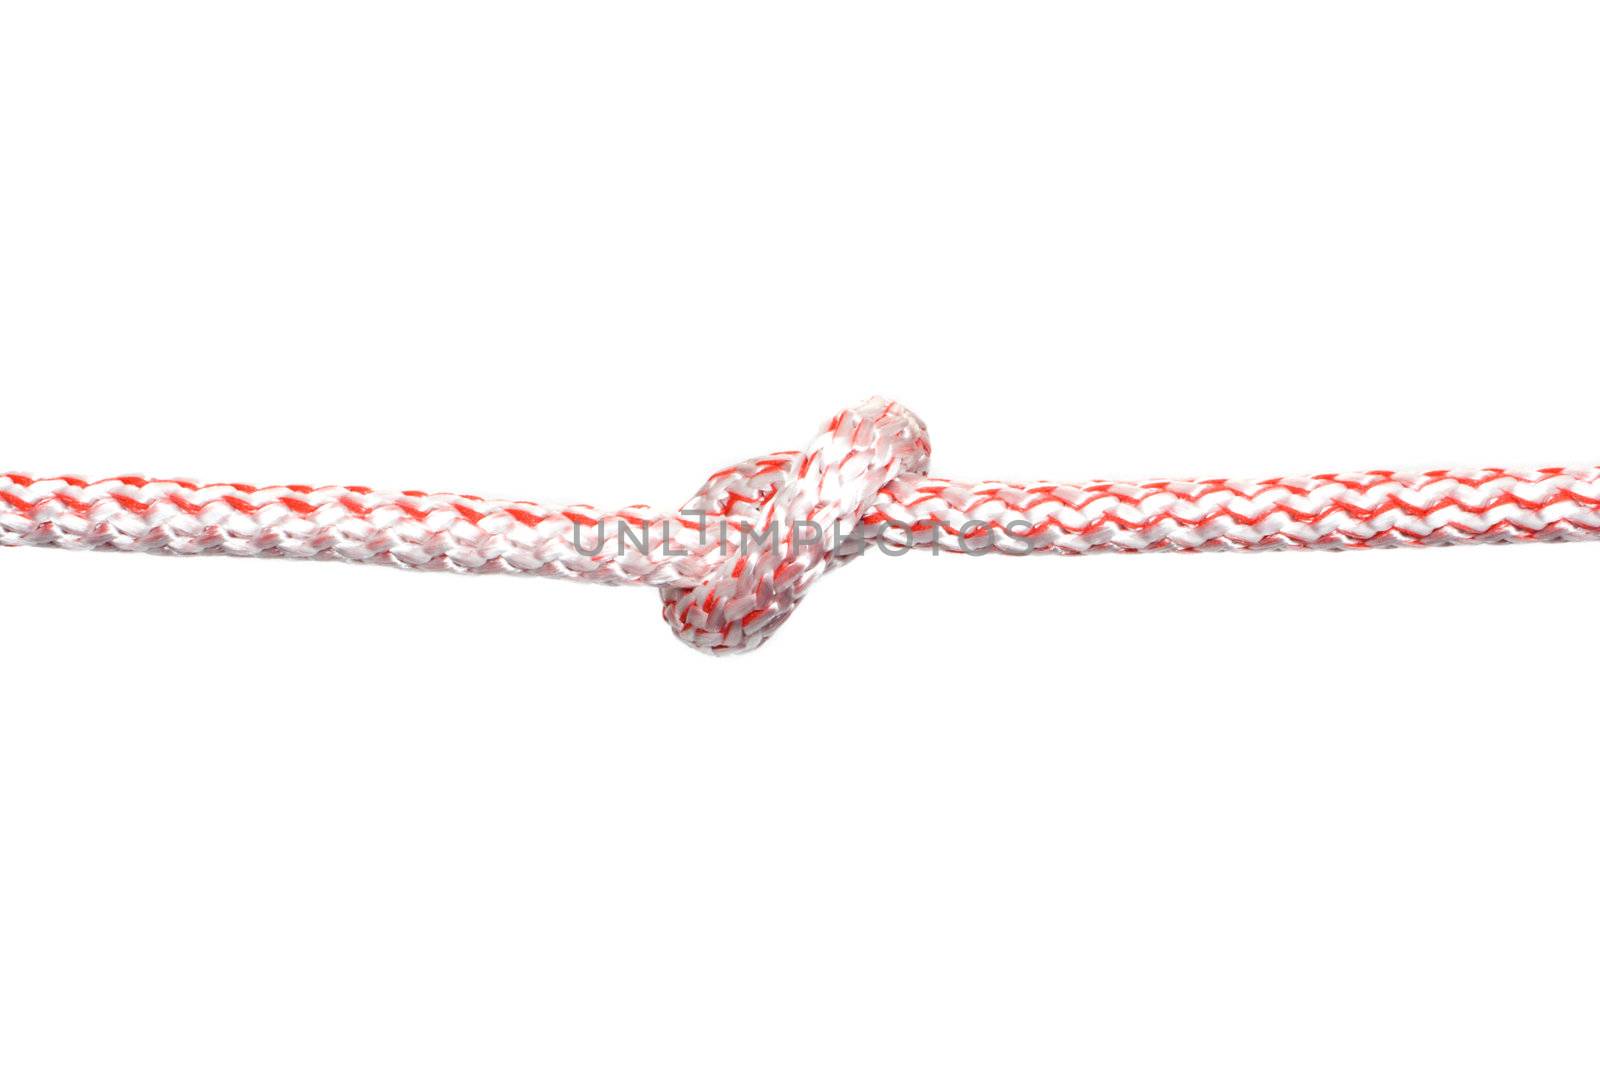 rope with knot 1 by Alekcey